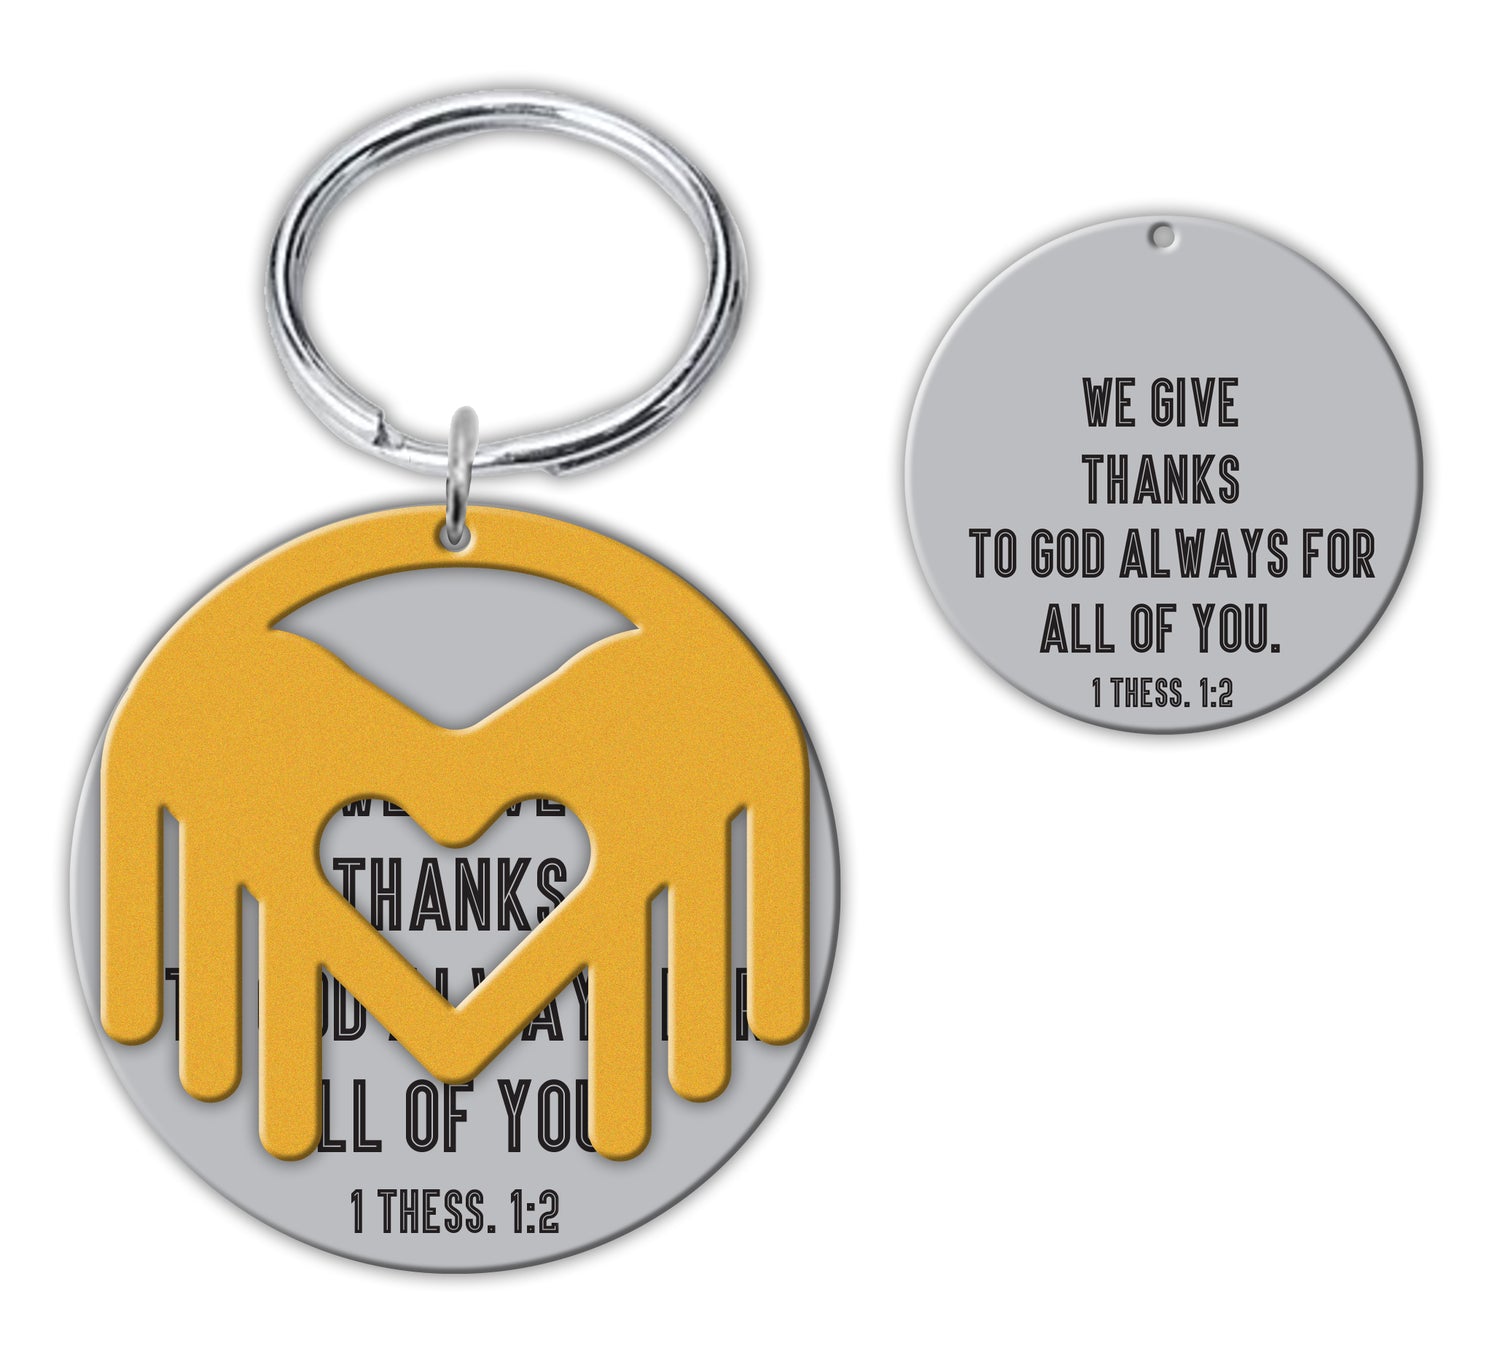 Key Chain in Gift Box - Serving with a Heart like Jesus